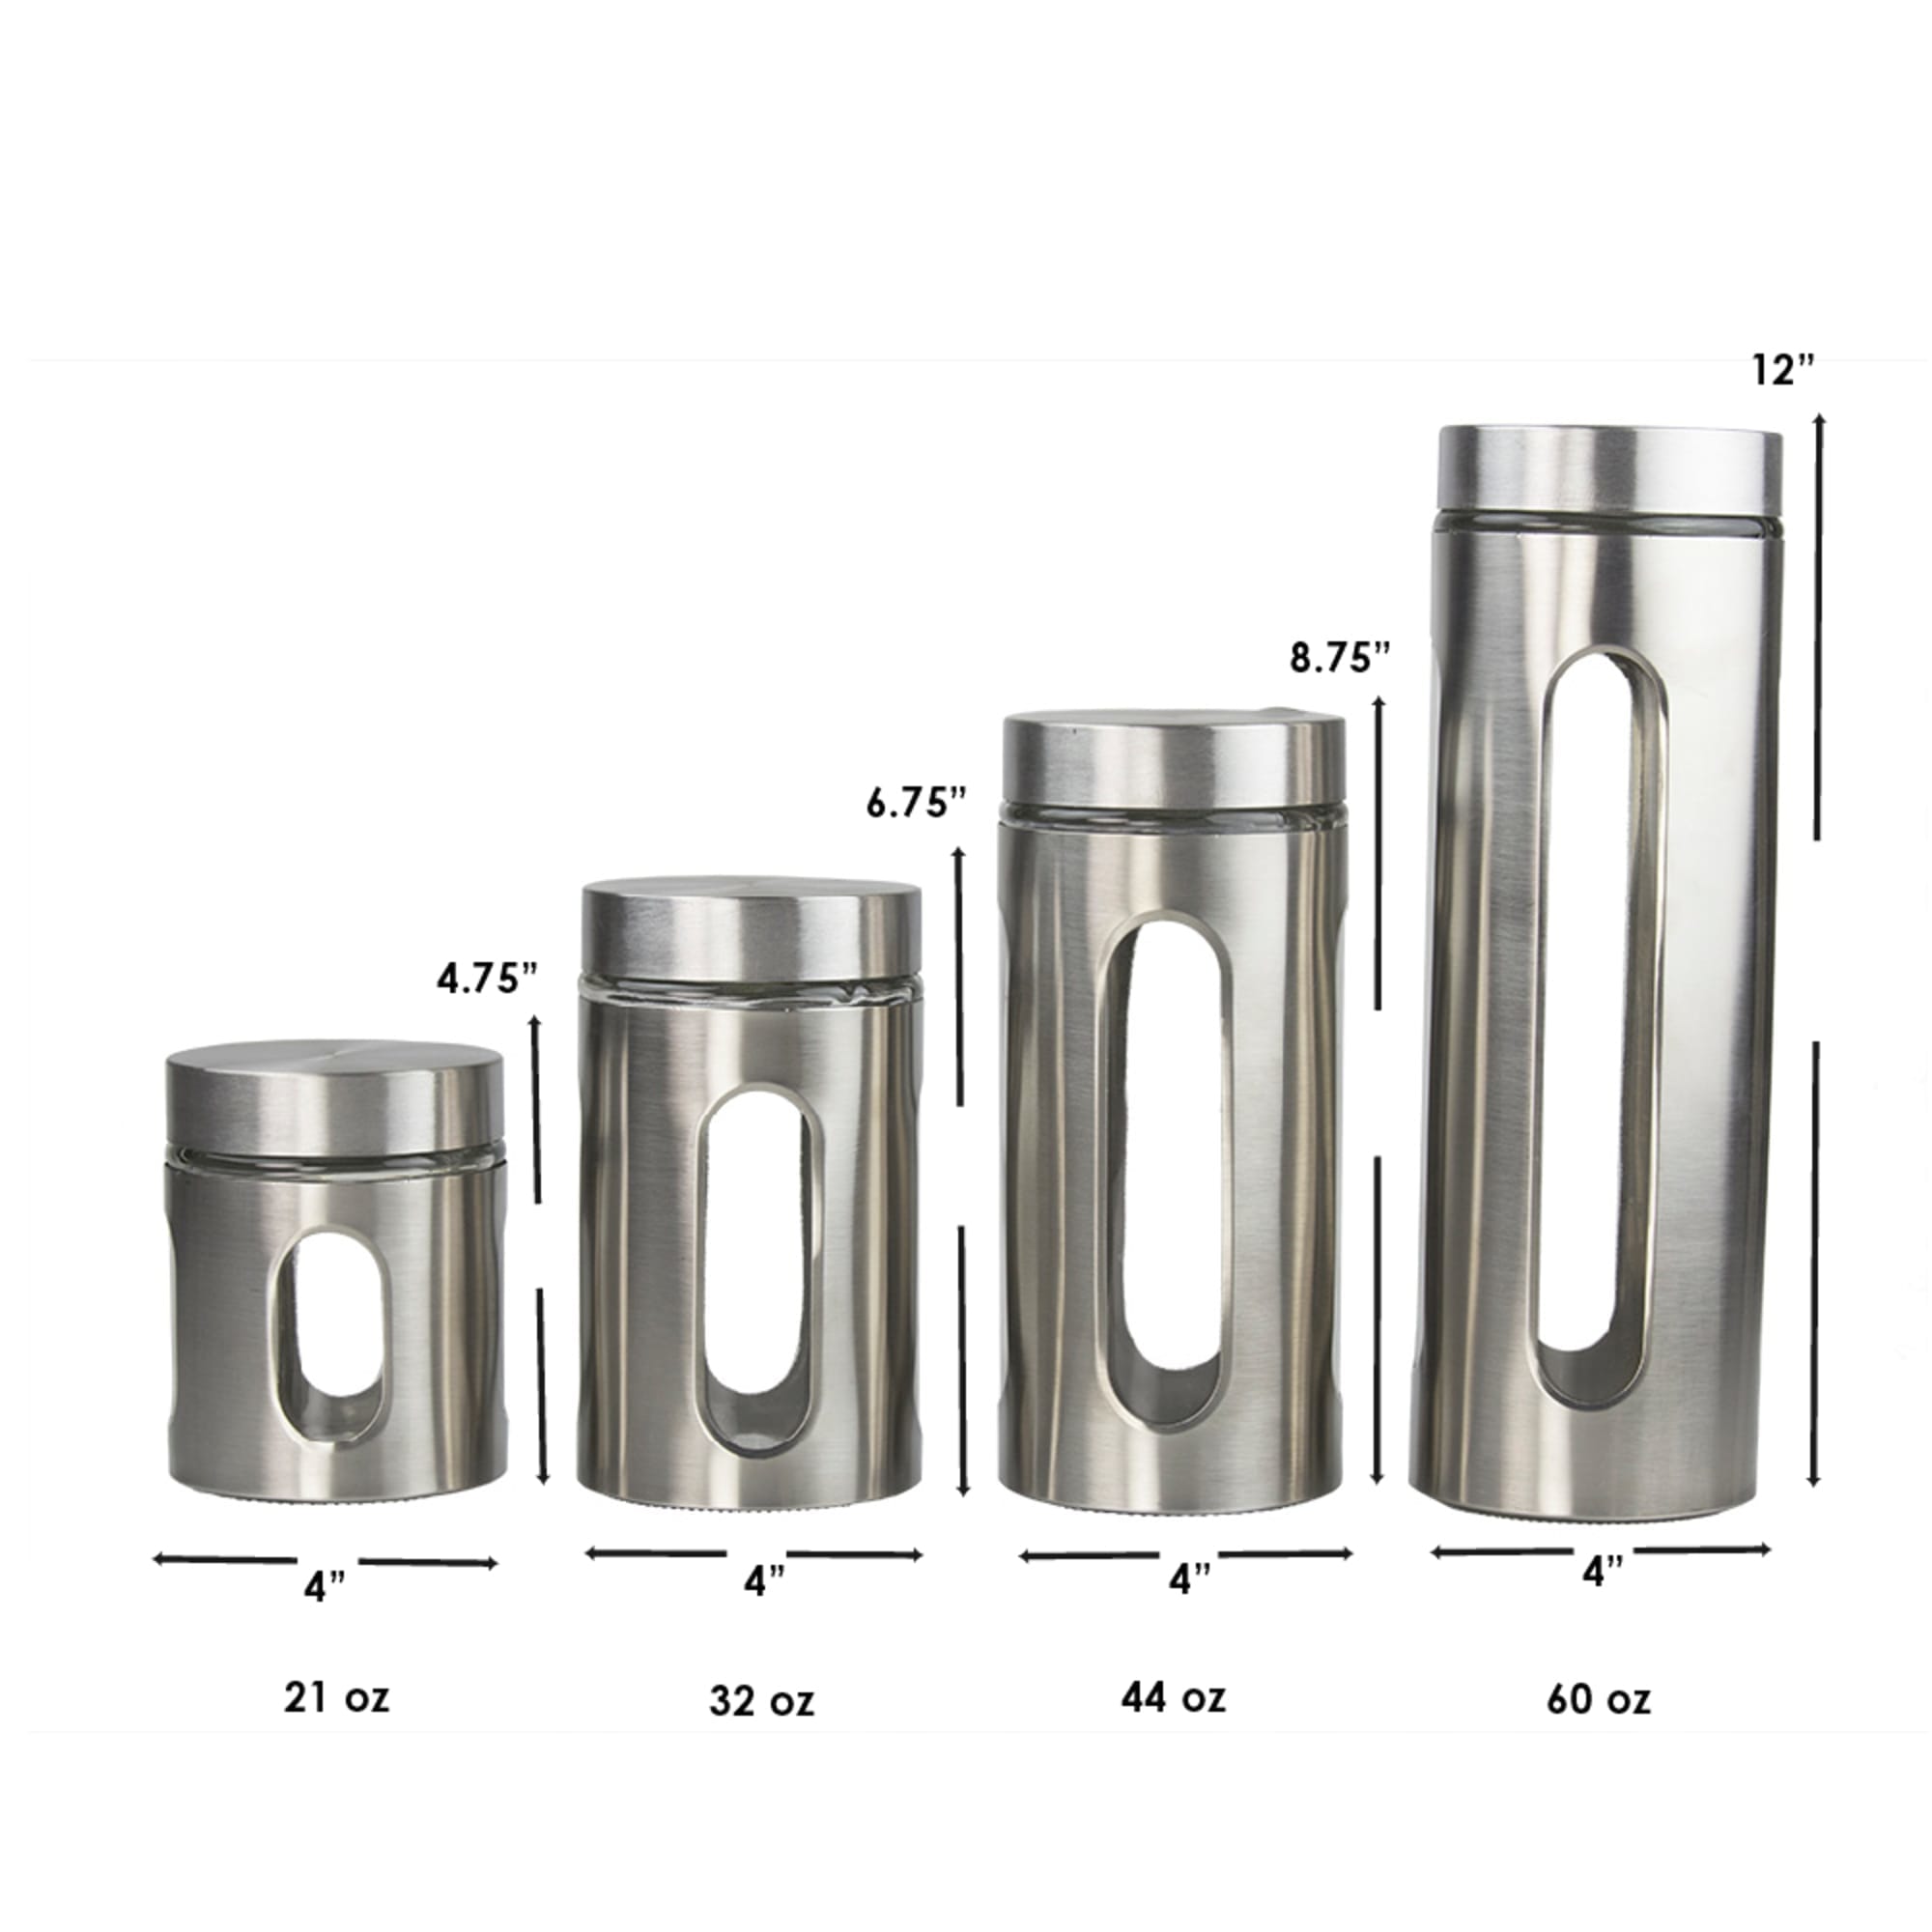 Home Basics 4 Piece Metal Canister Set $20.00 EACH, CASE PACK OF 4